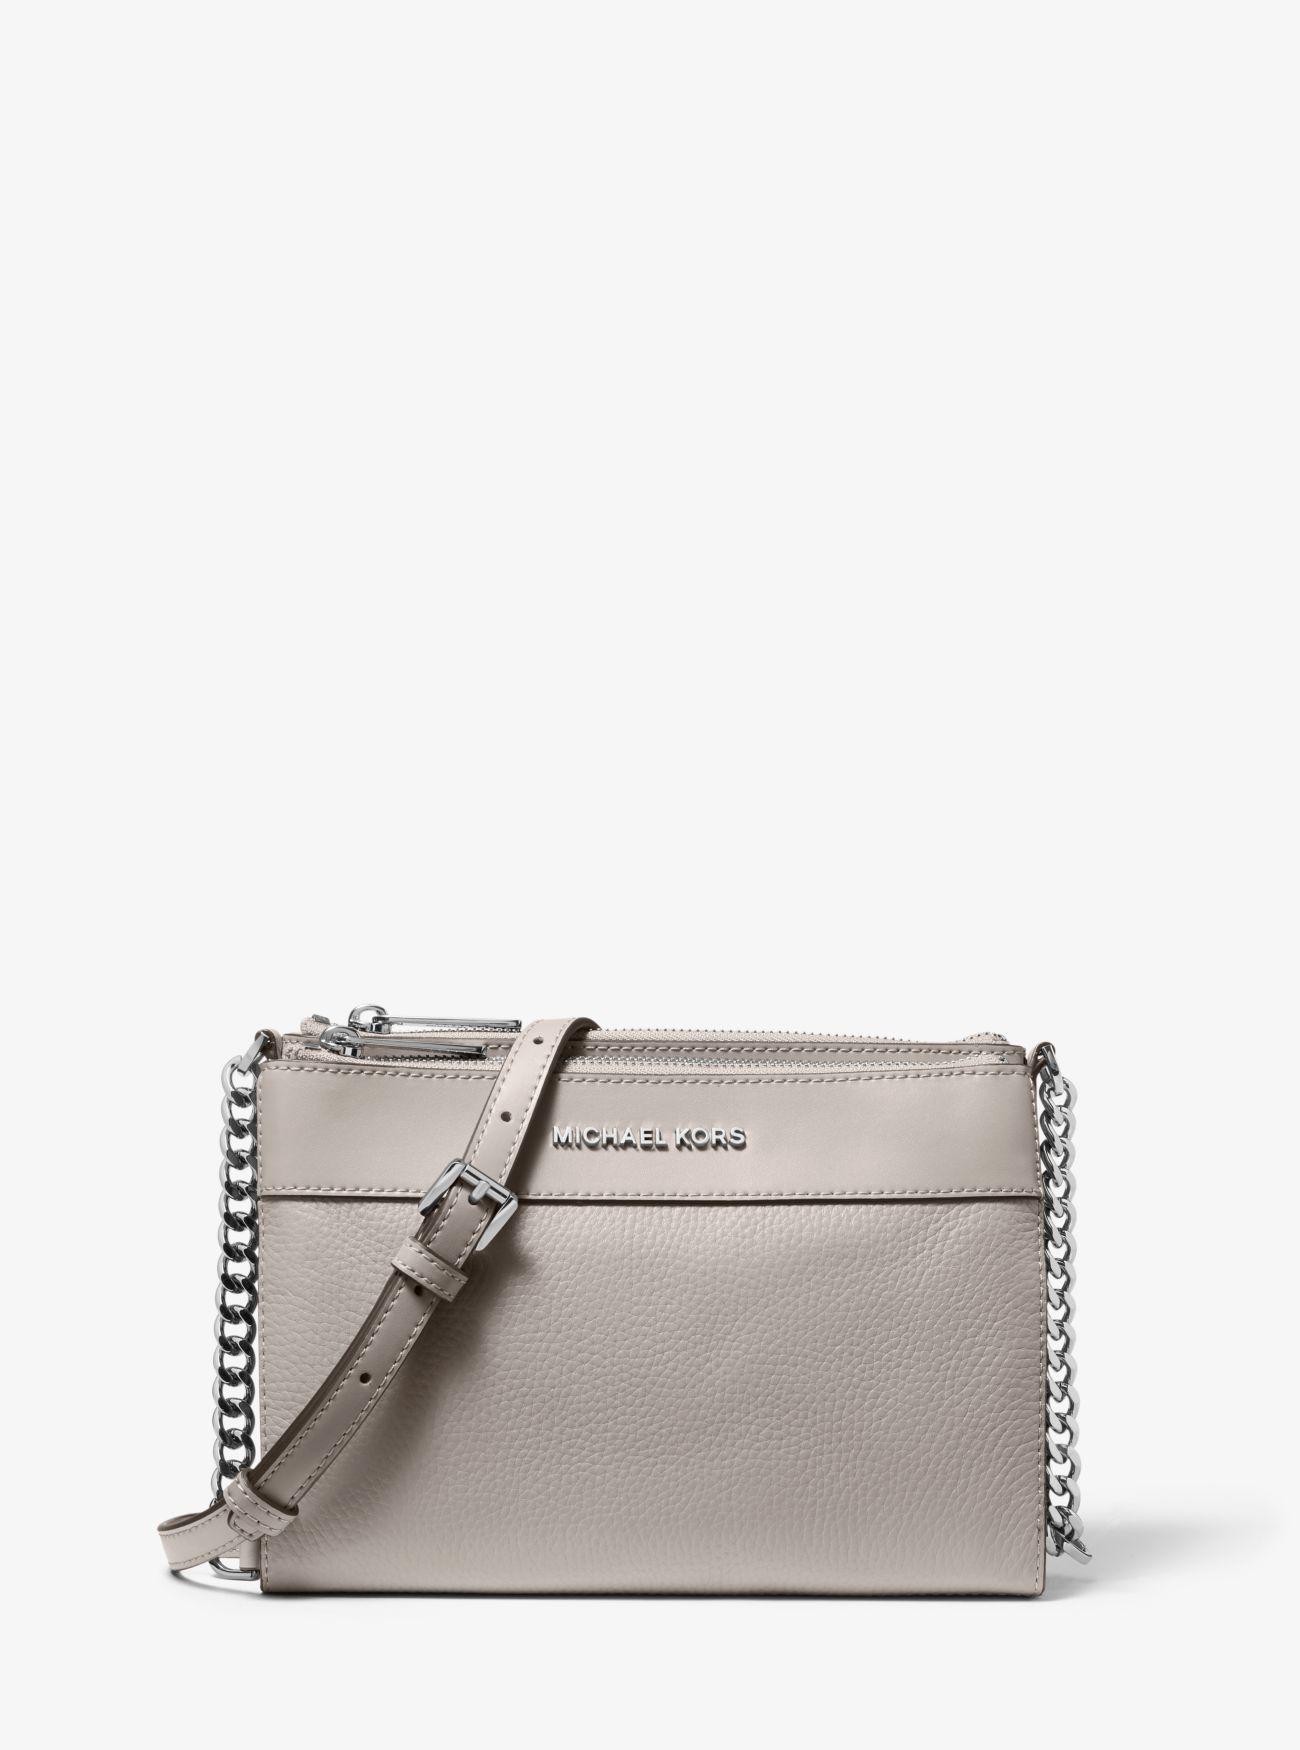 Michael Kors Kenly Large Pebbled Leather Crossbody Bag in Grey (Gray ...